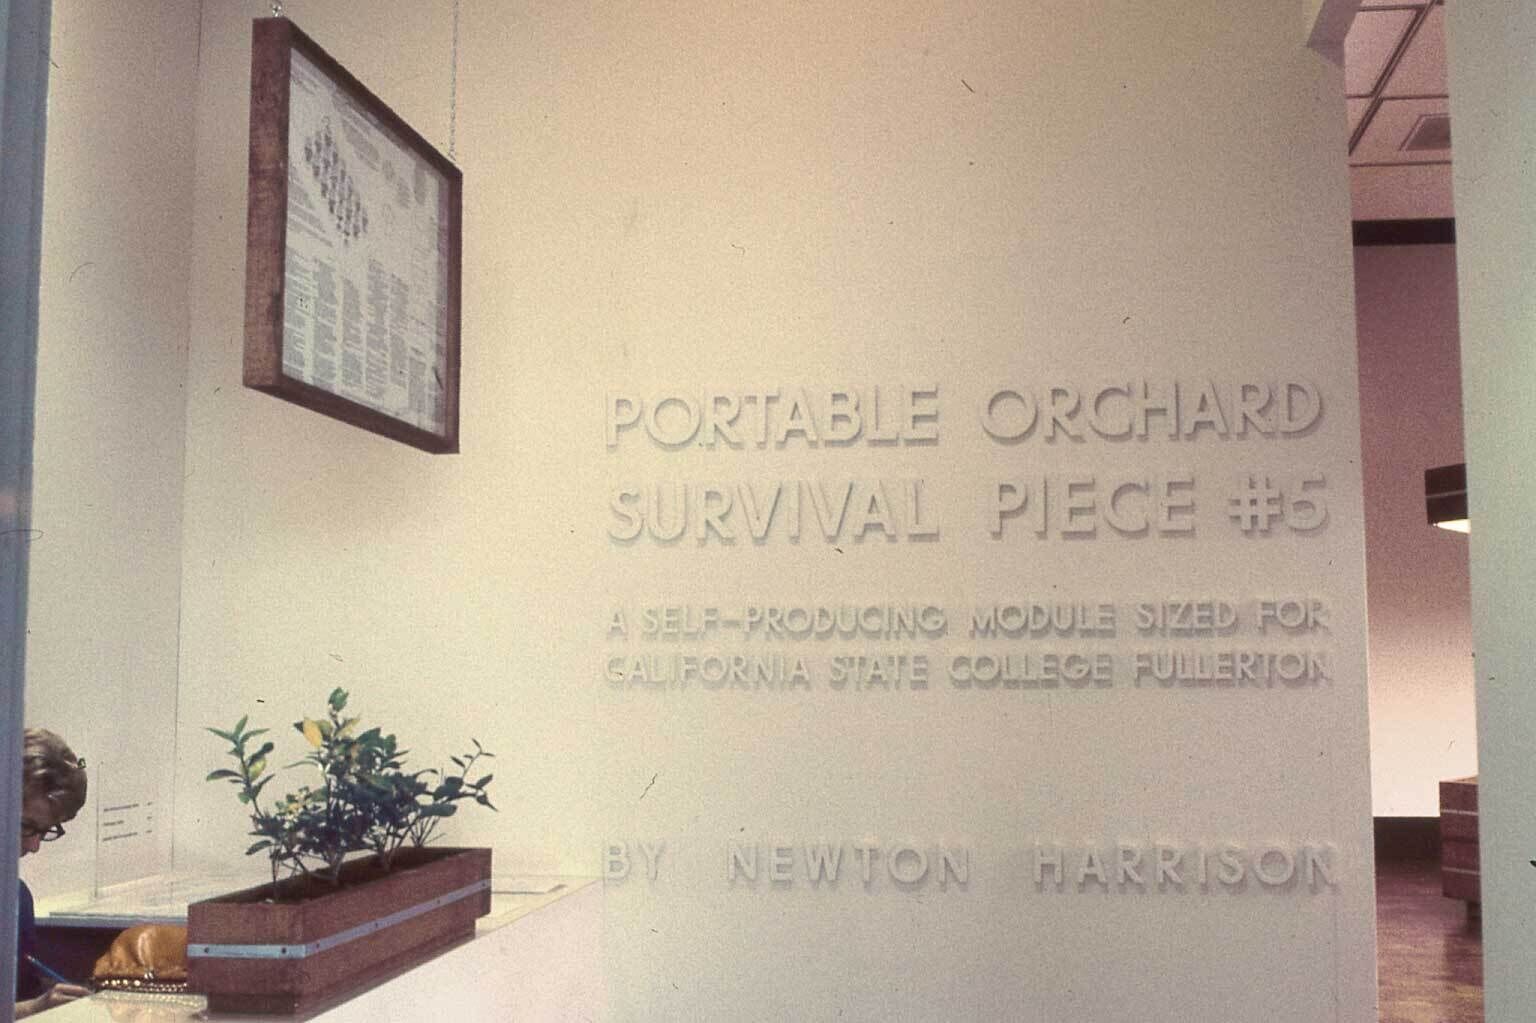 "Portable Orchard Survival Piece #5" by Newton Harrison, at for California State College Fullerton, displayed on a wall.